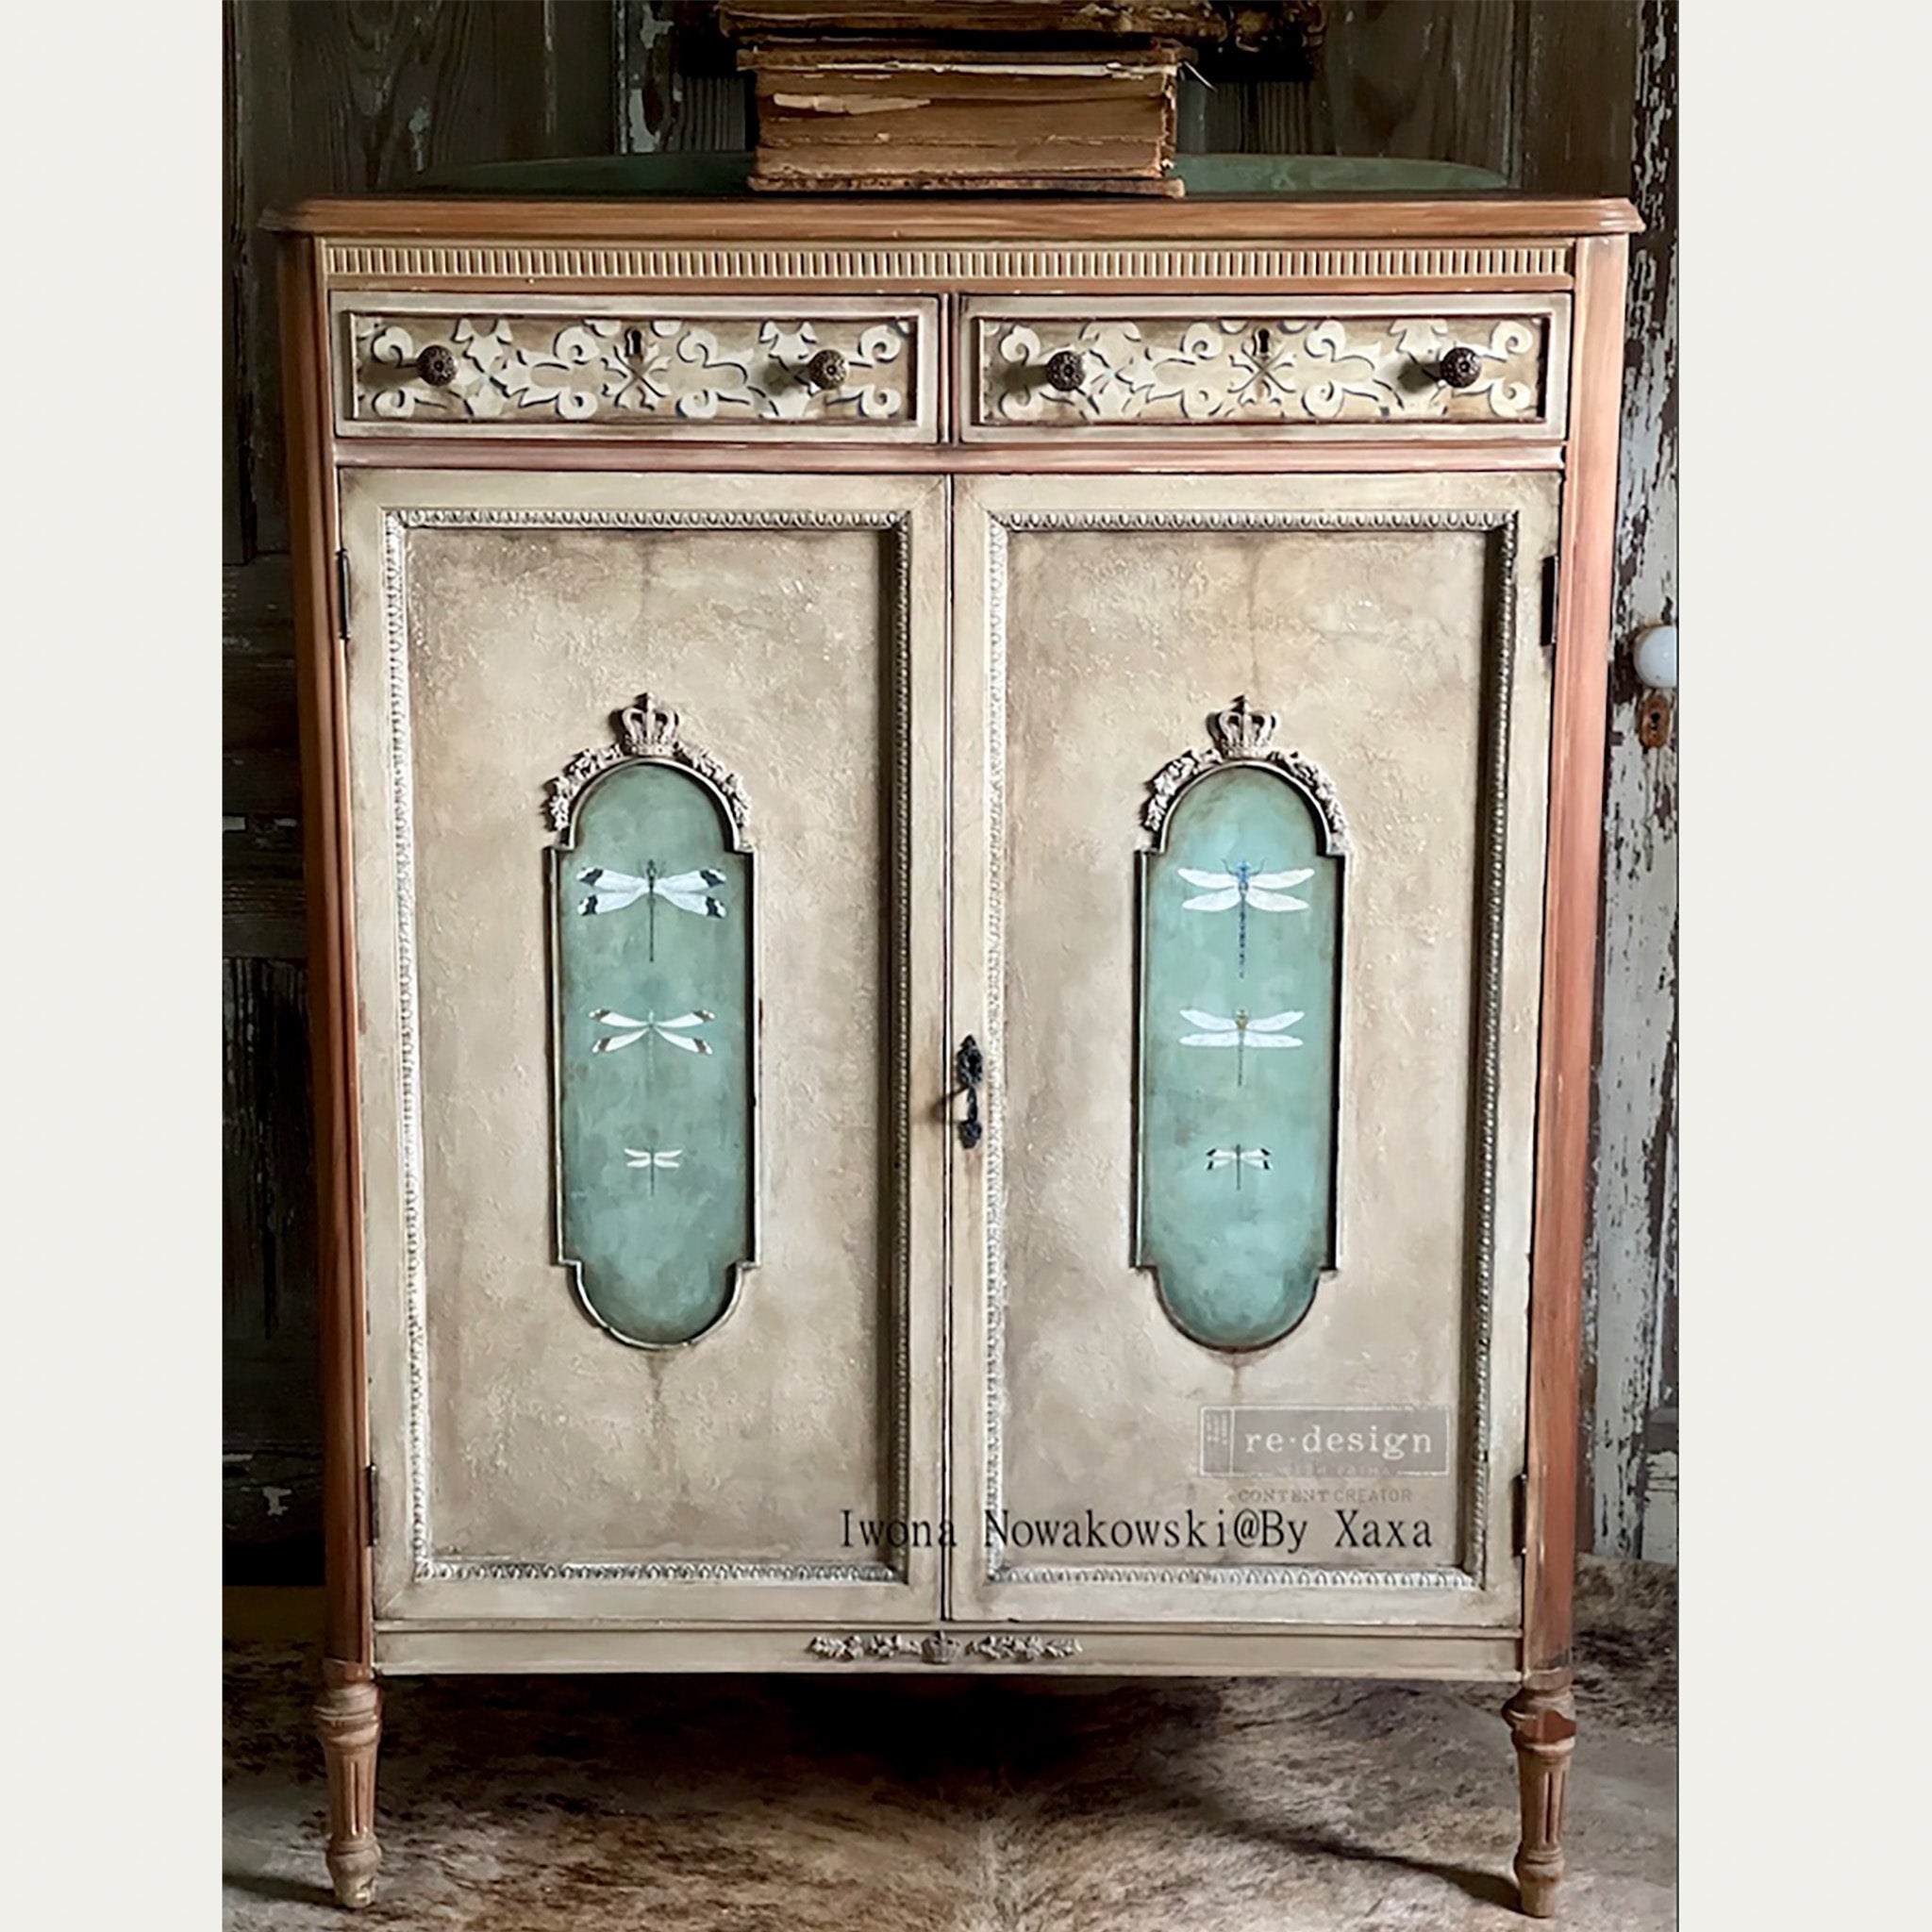 A vintage small storage cabinet refurbished by Iwona Nowakowski @ By Xaxa is painted light brown and features ReDesign with Prima's Spring Dragonfly small transfer on its door inlays.